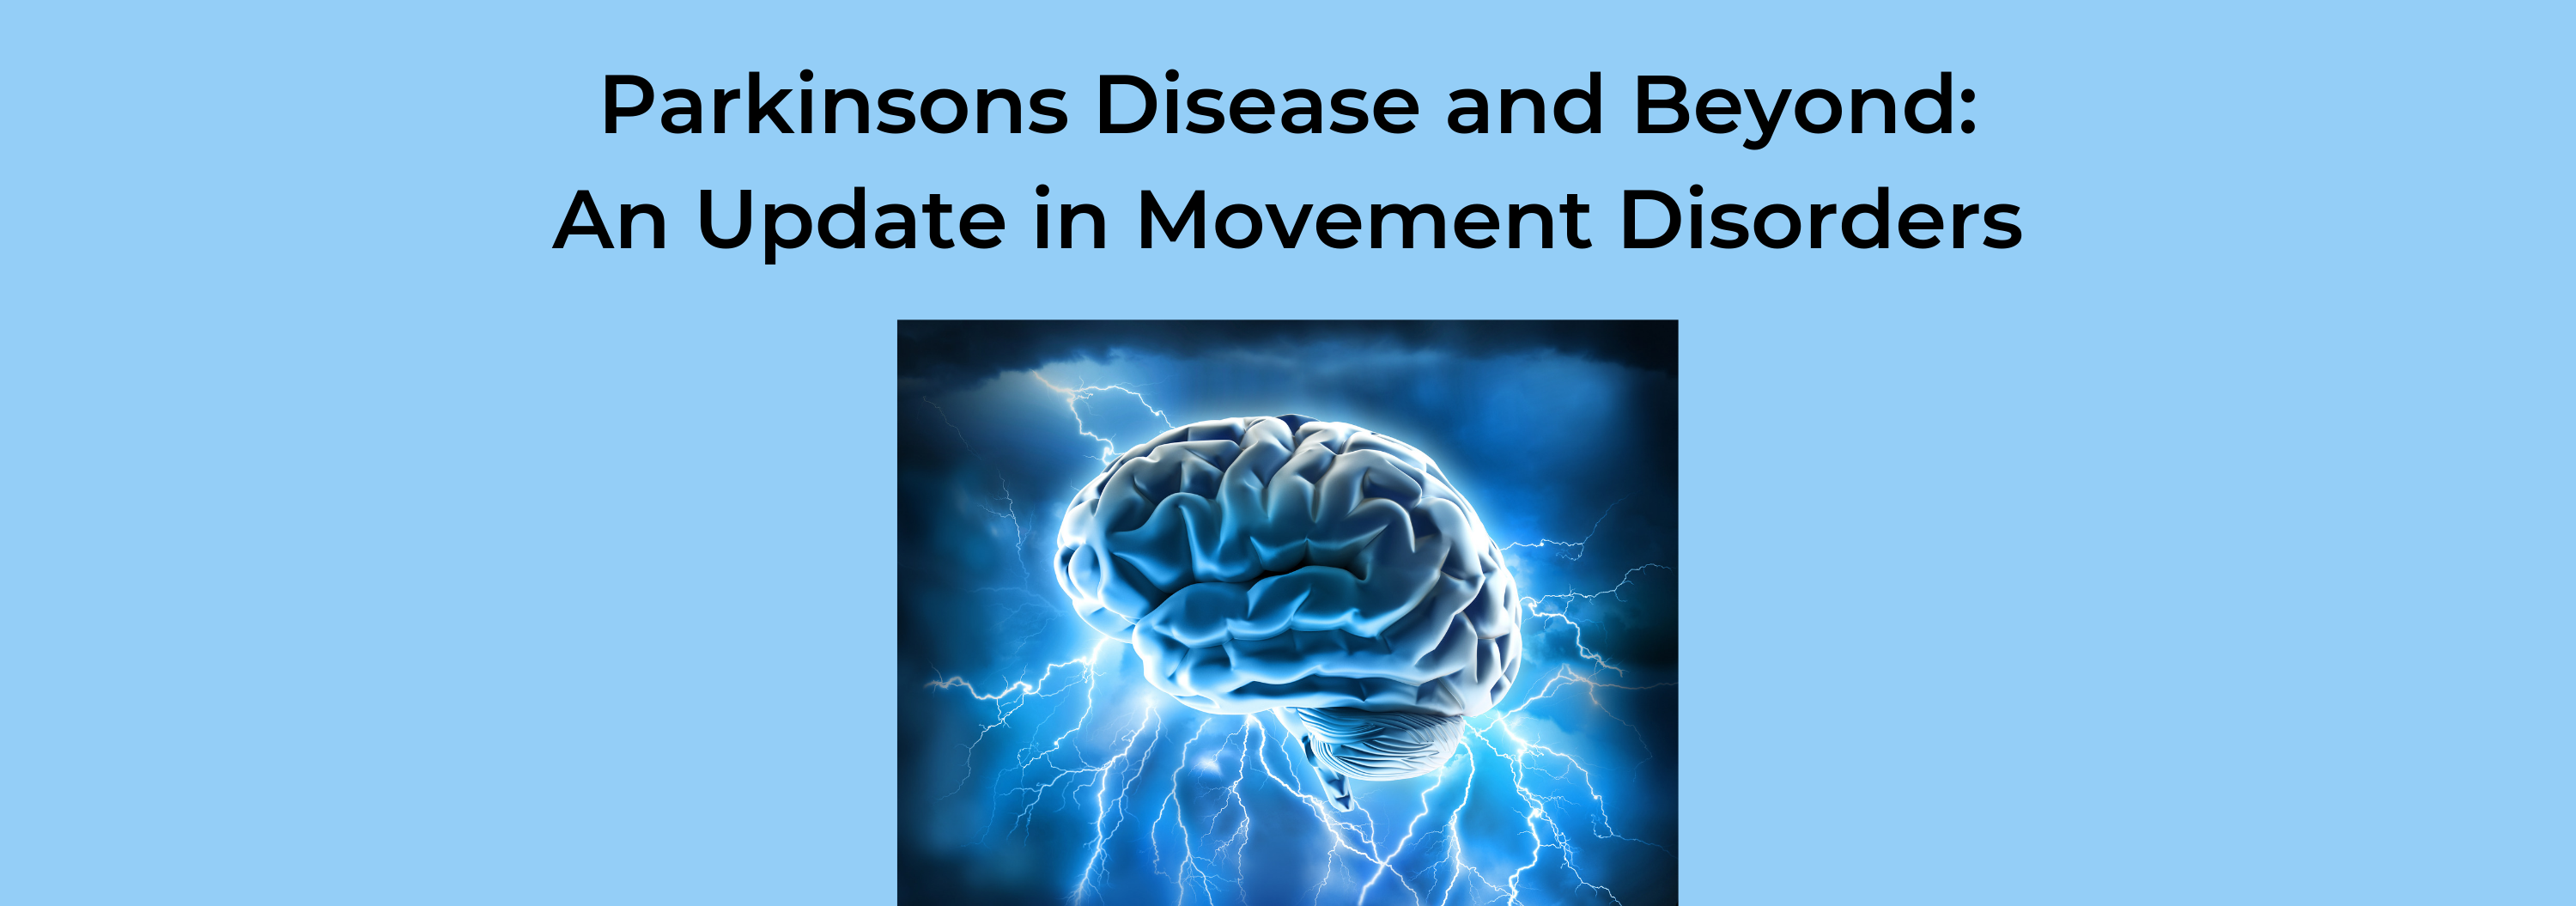 2019 Parkinsons Disease and Beyond: An Update in Movement Disorders Banner